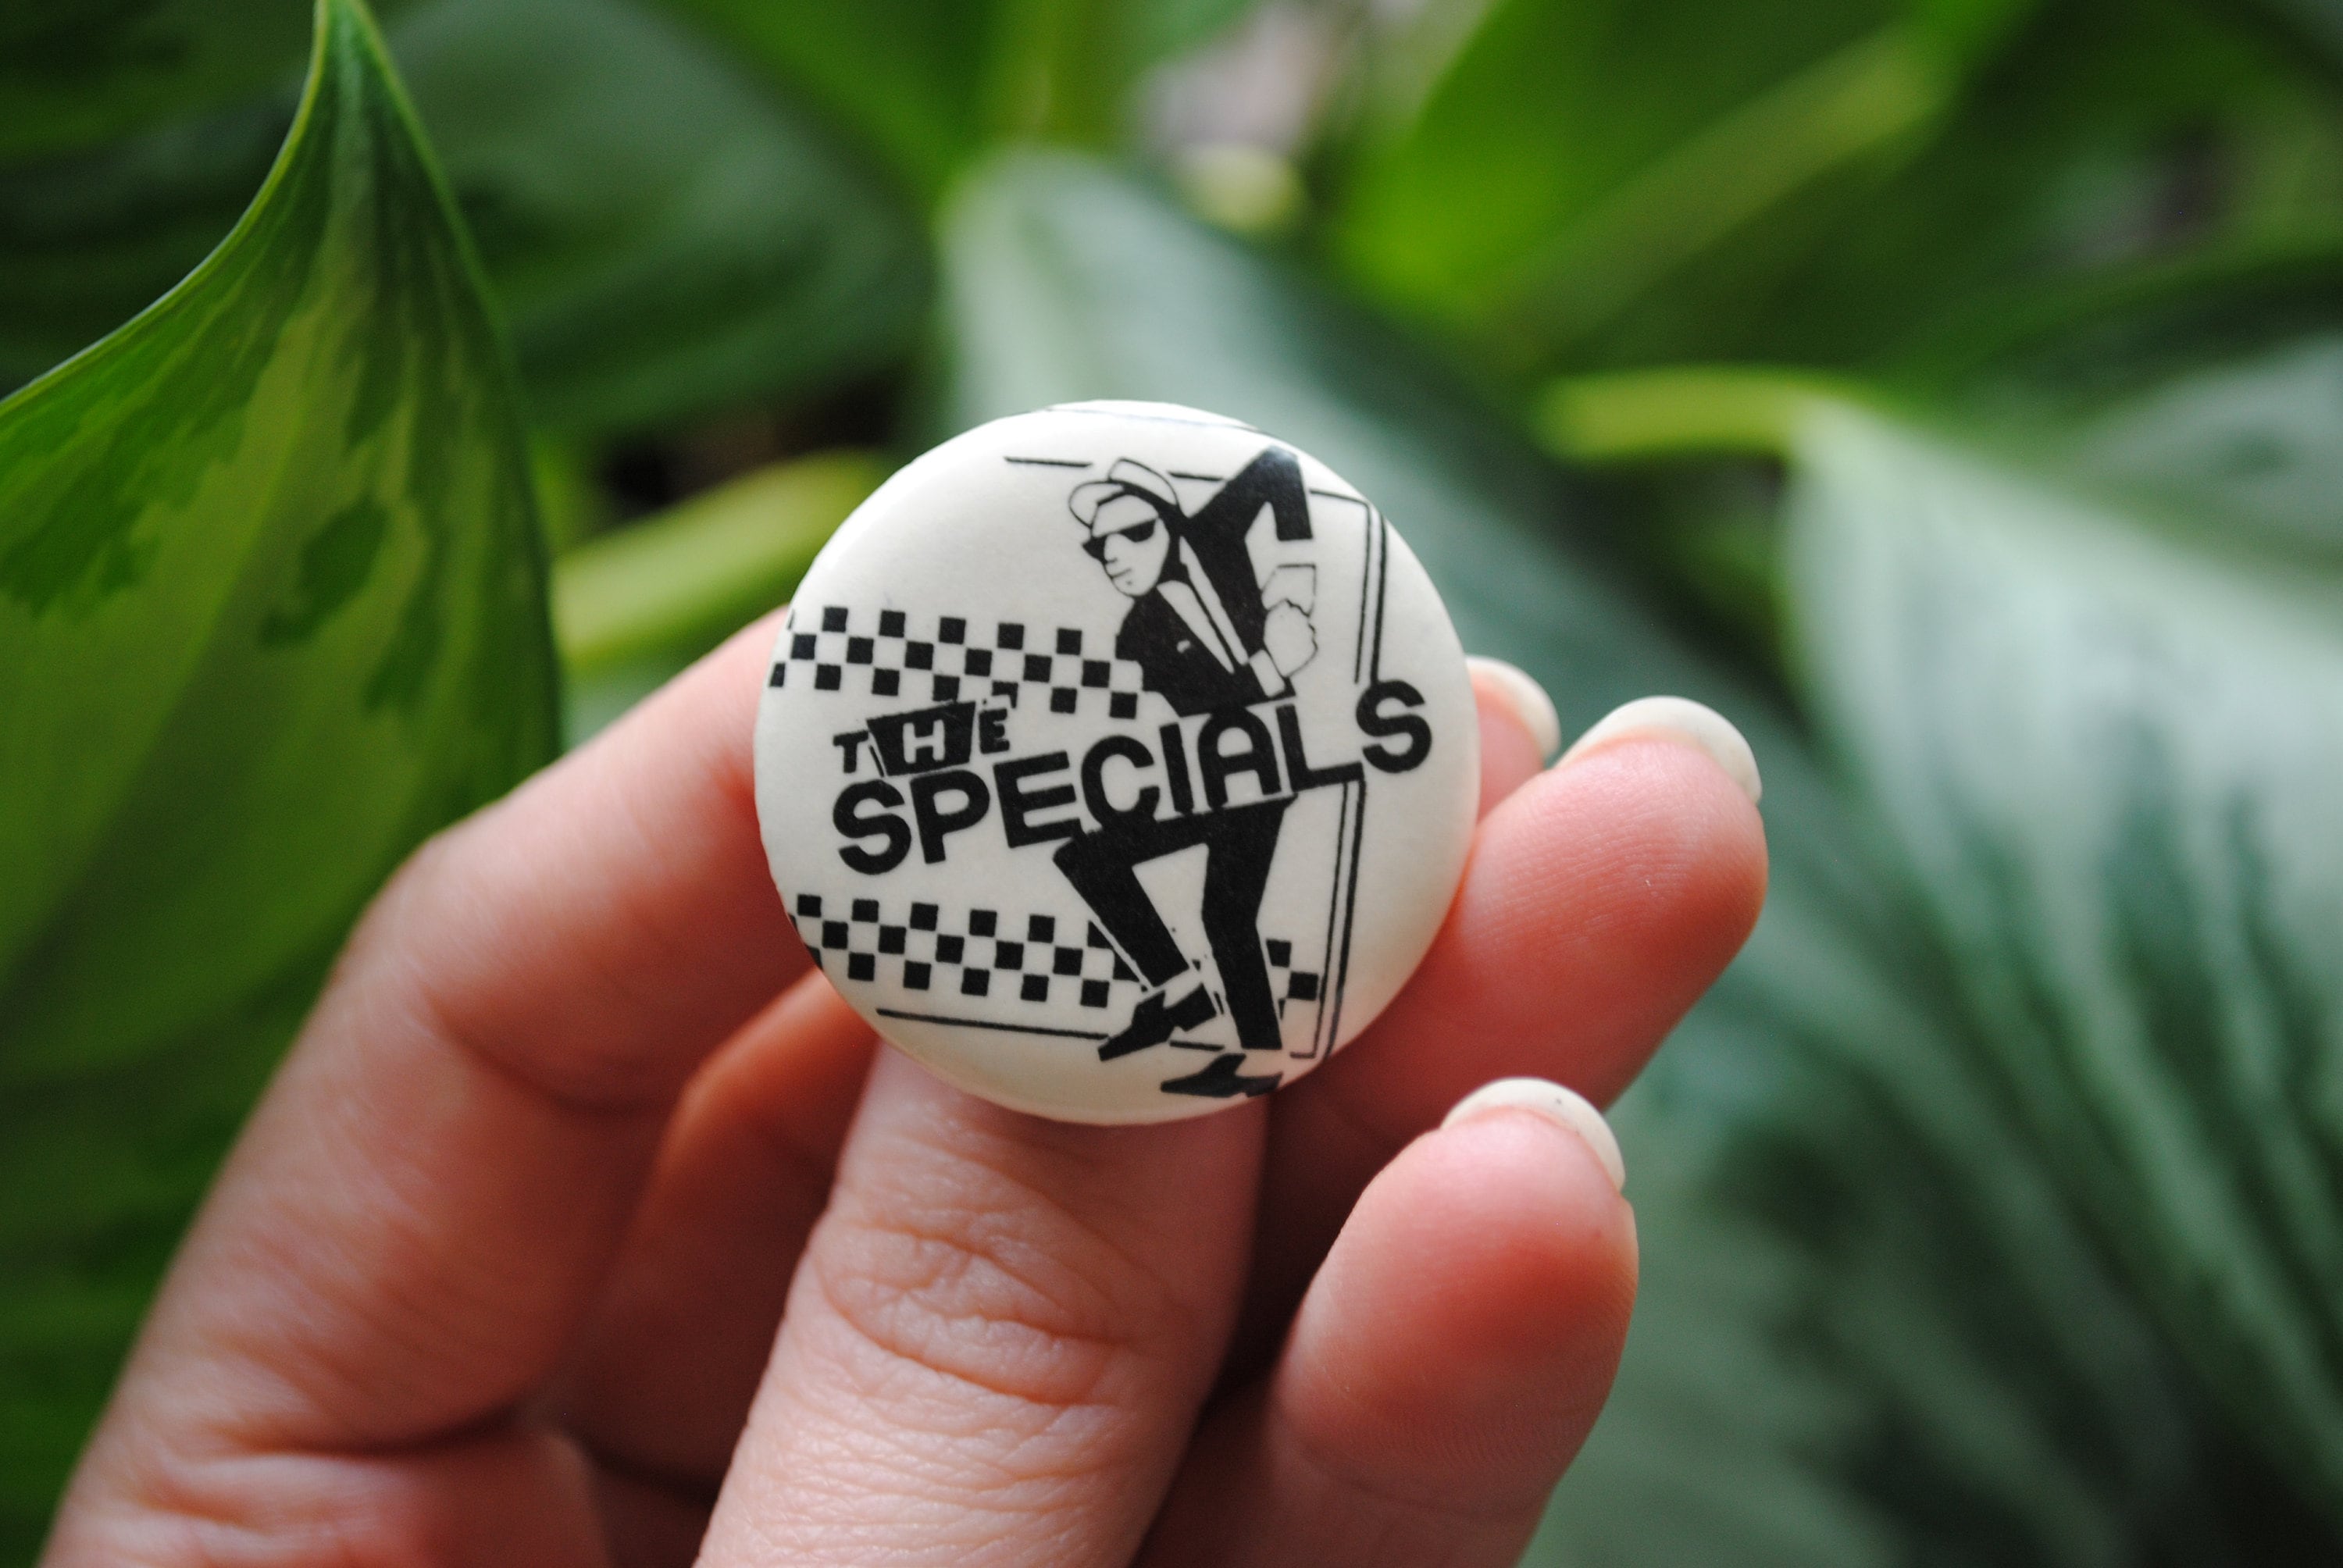 THE SELECTER BUTTON BADGE 2 TONE PUNK REVIVAL BAND Too Much Pressure 25mm PIN 